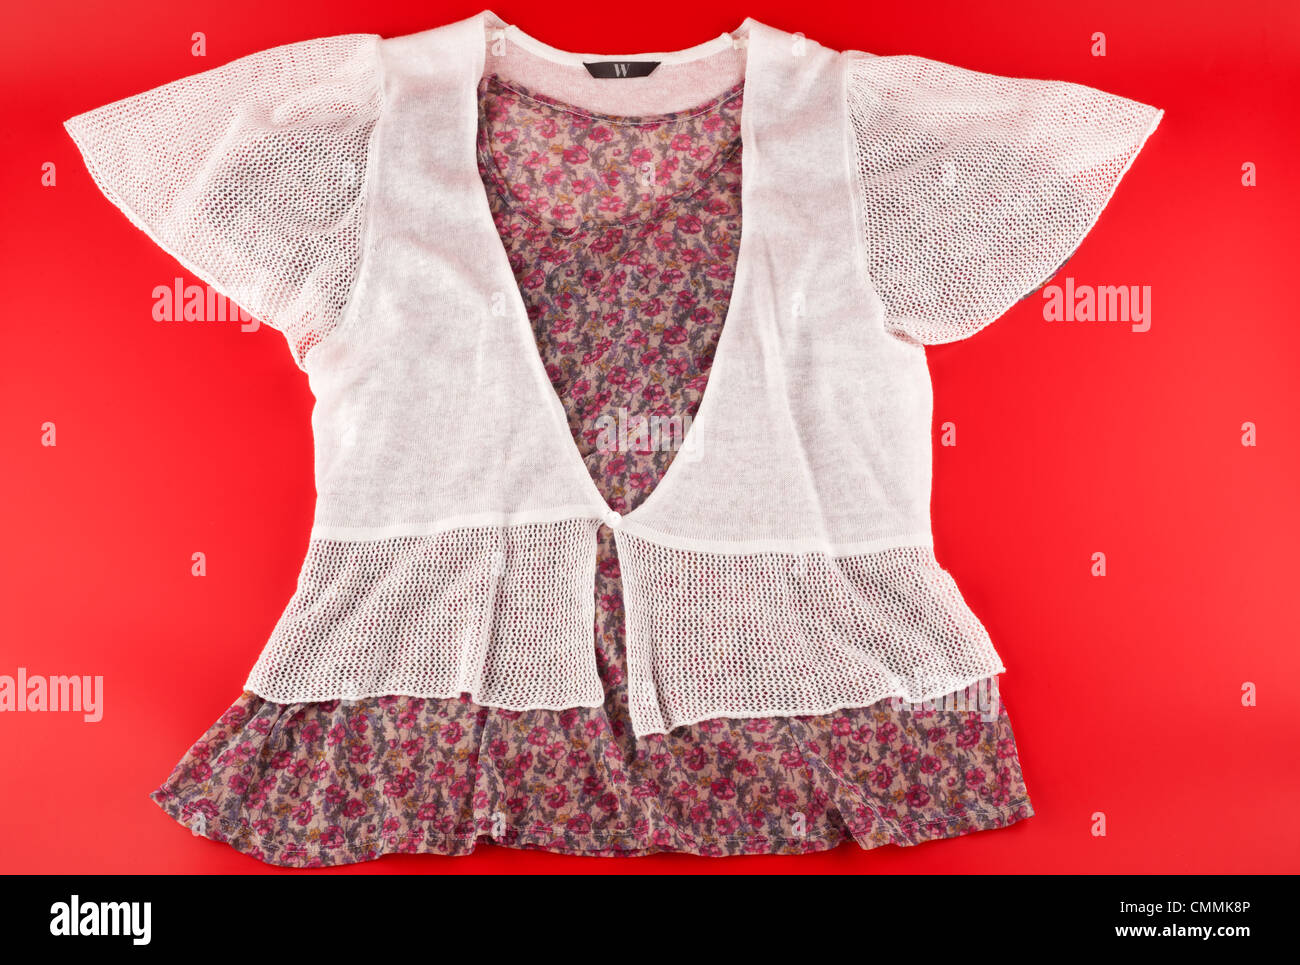 ladies pink floral blouse white short sleeved cardigan Stock Photo